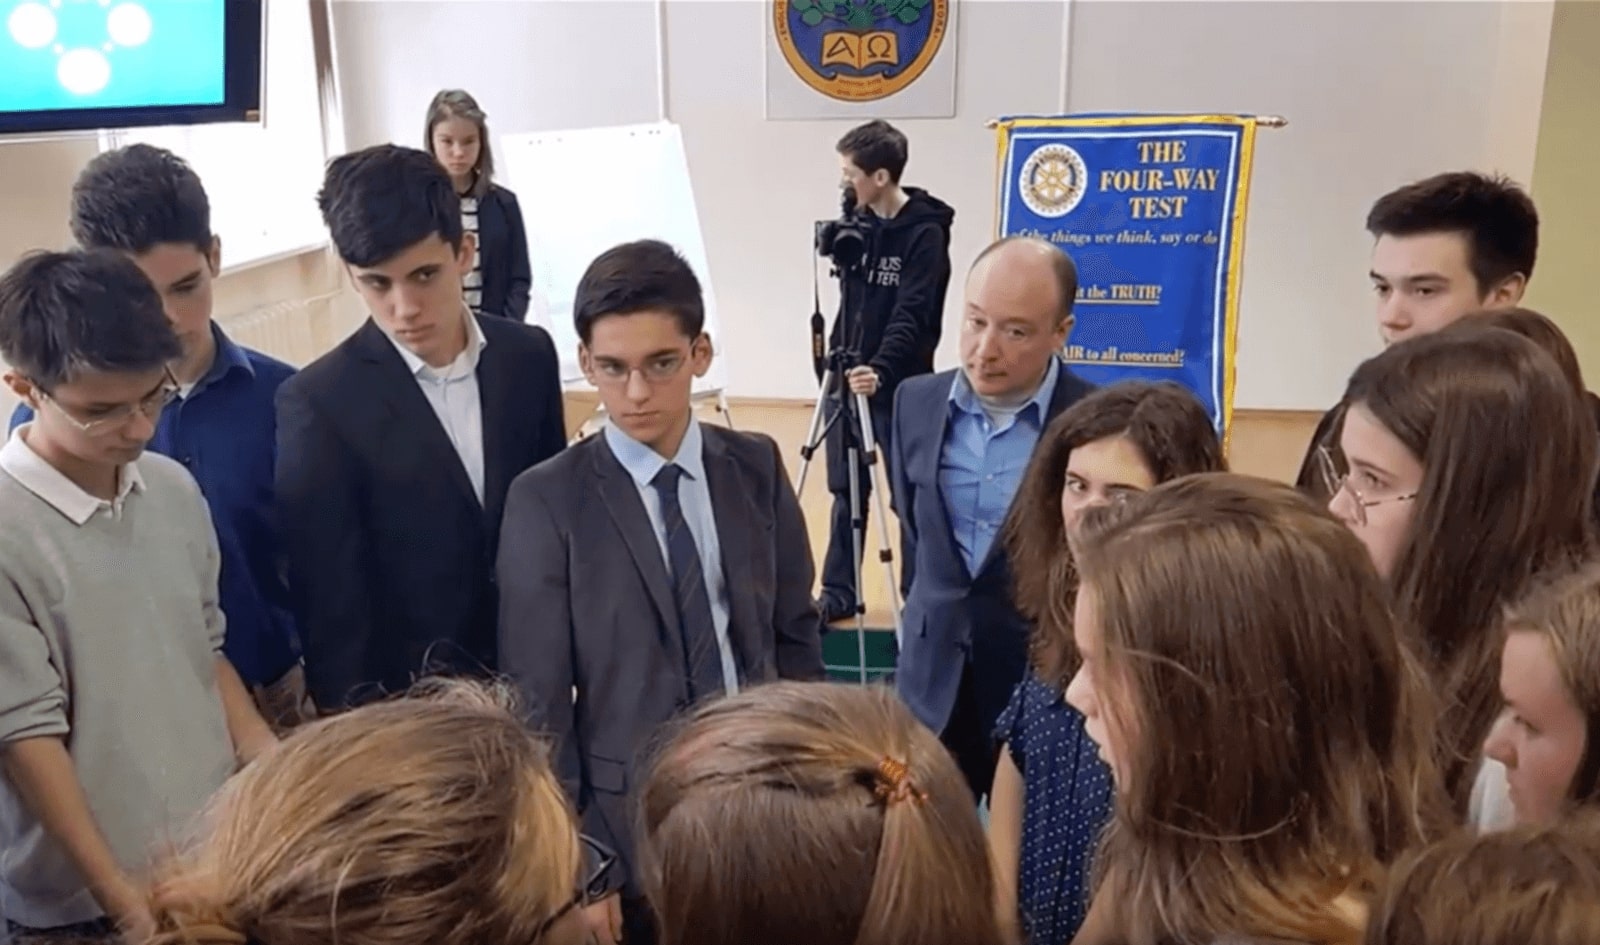 Mark Erjavec in a special thank you video of Rotary Interact Club School 155, Kyiv, Ukraine